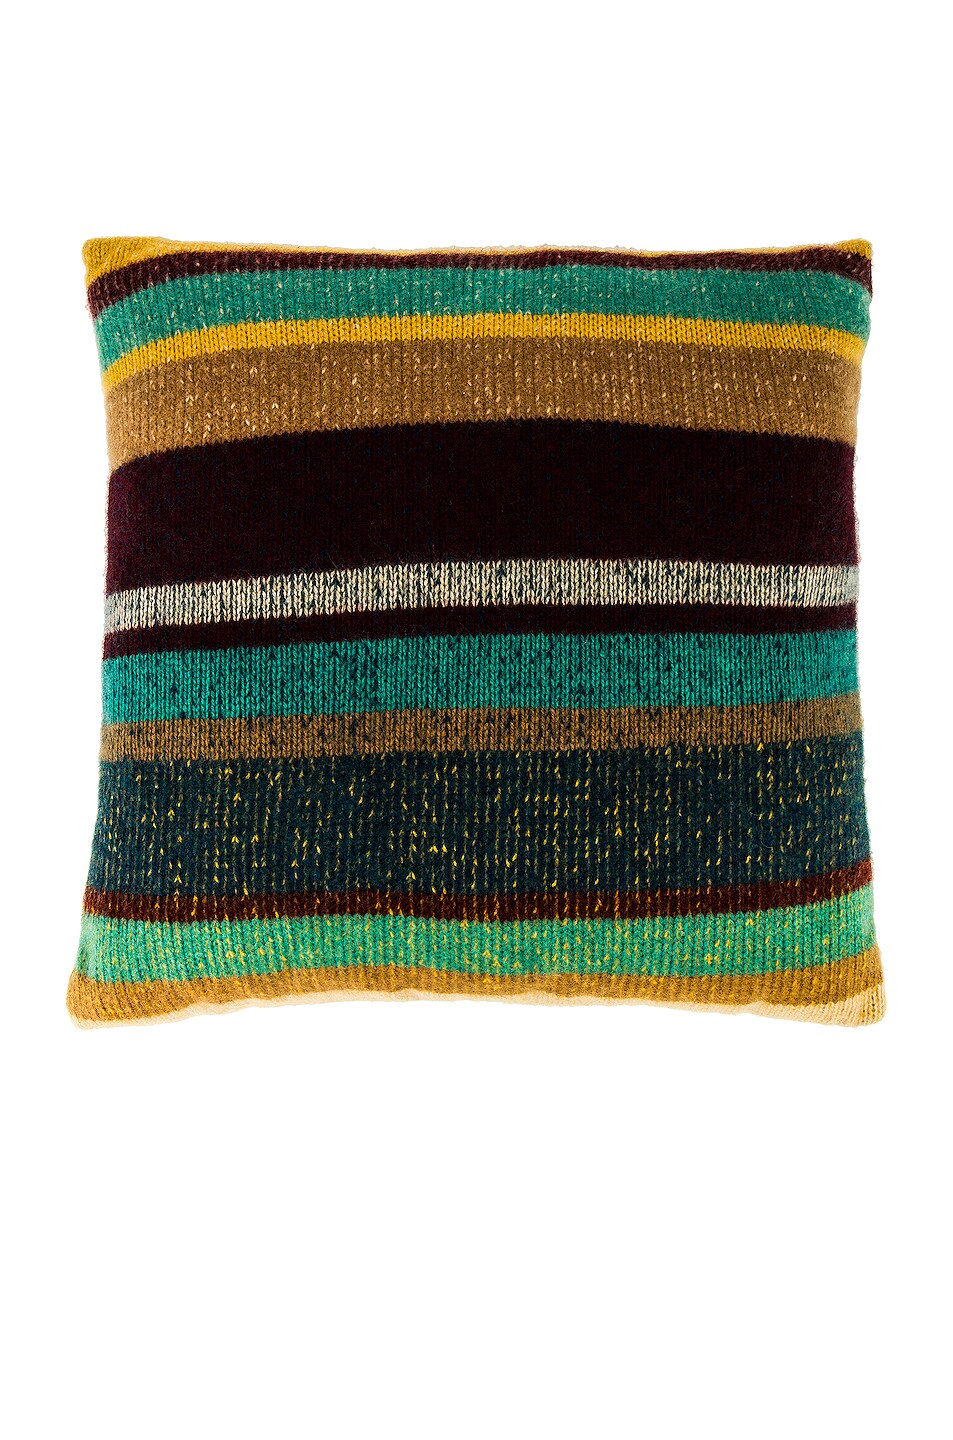 Image 1 of The Elder Statesman Cashmere Super Soft Pillow in Khaki, Yellow, Maroon, Turquoise, Peacock & Caramel